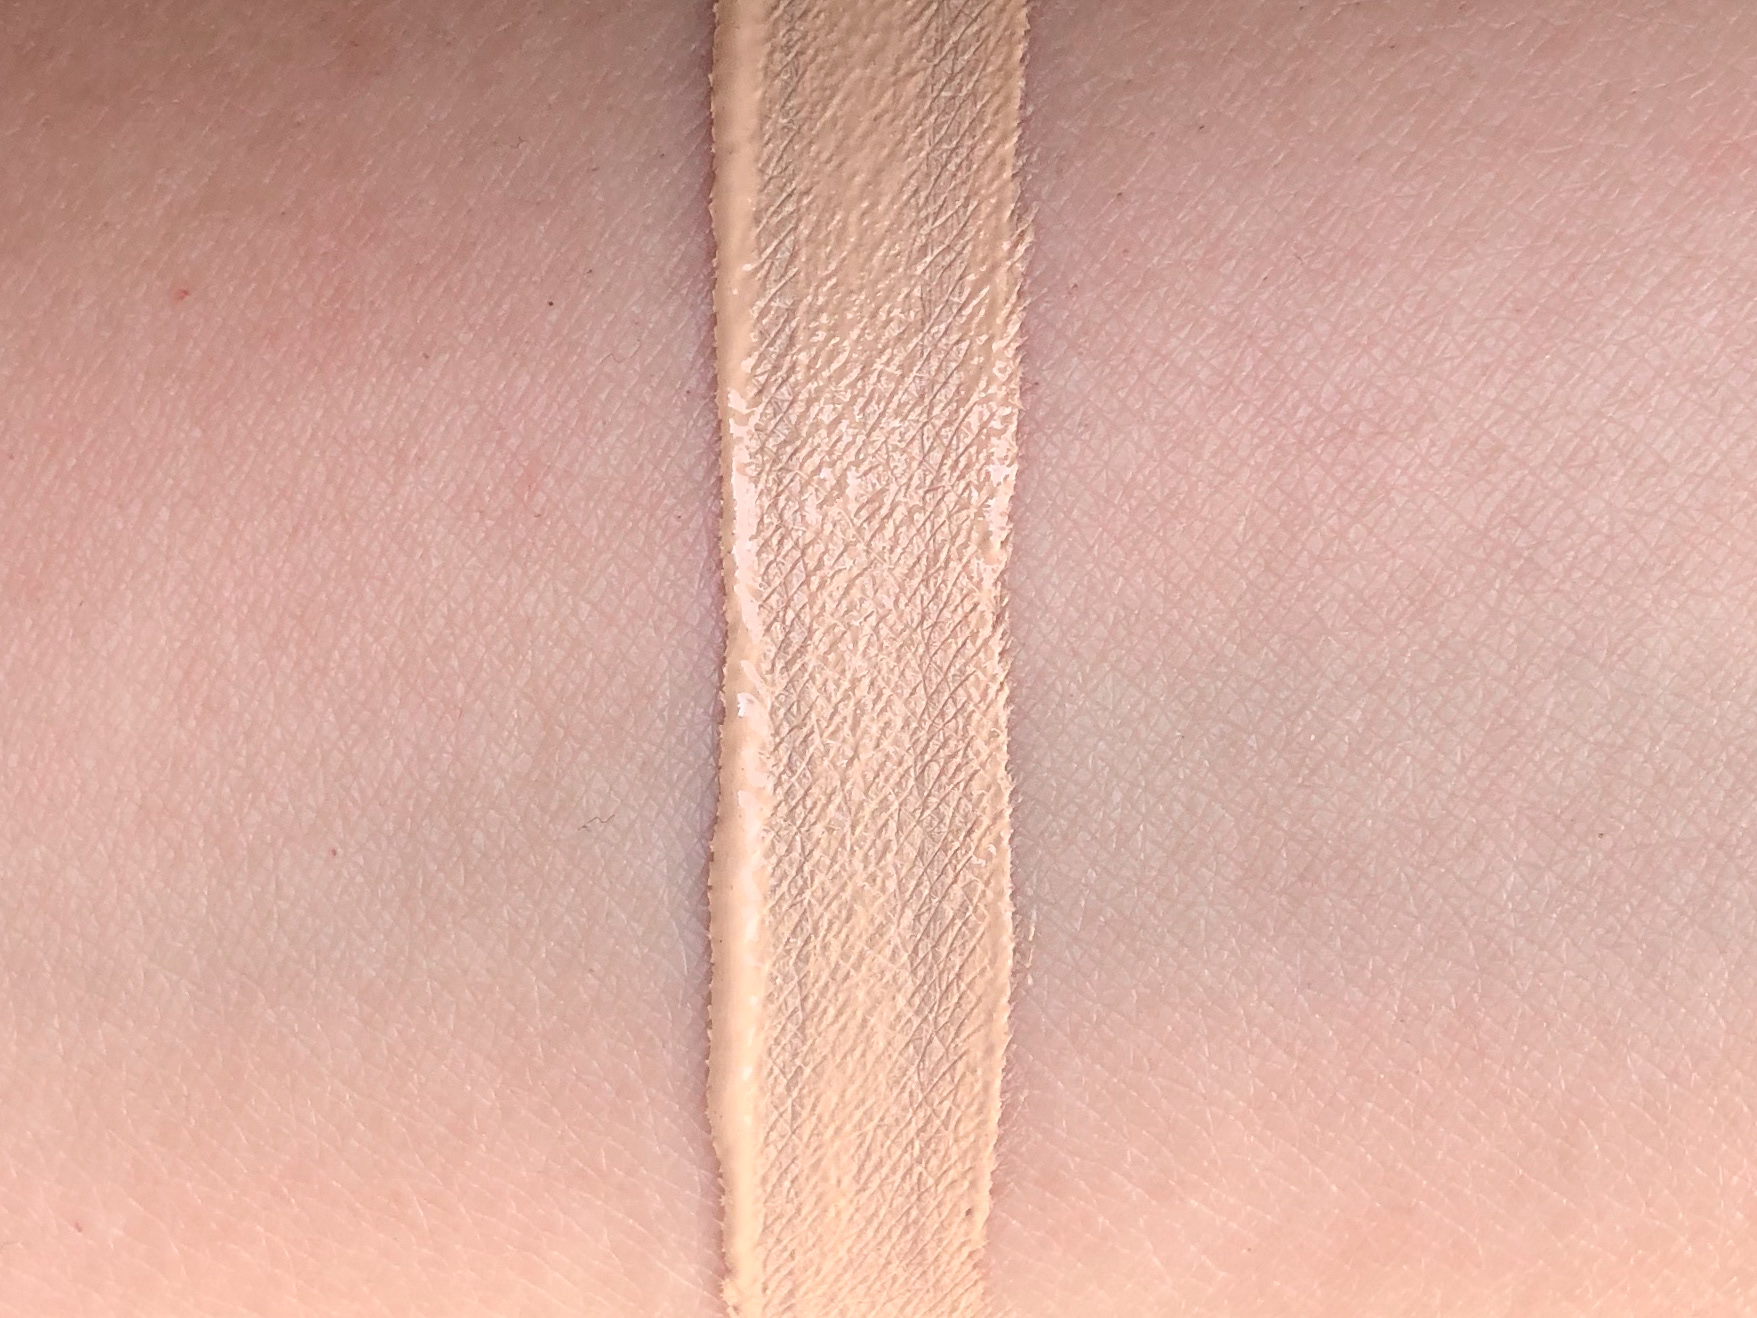 L'Oréal Infaillible More Than Concealer swatch 